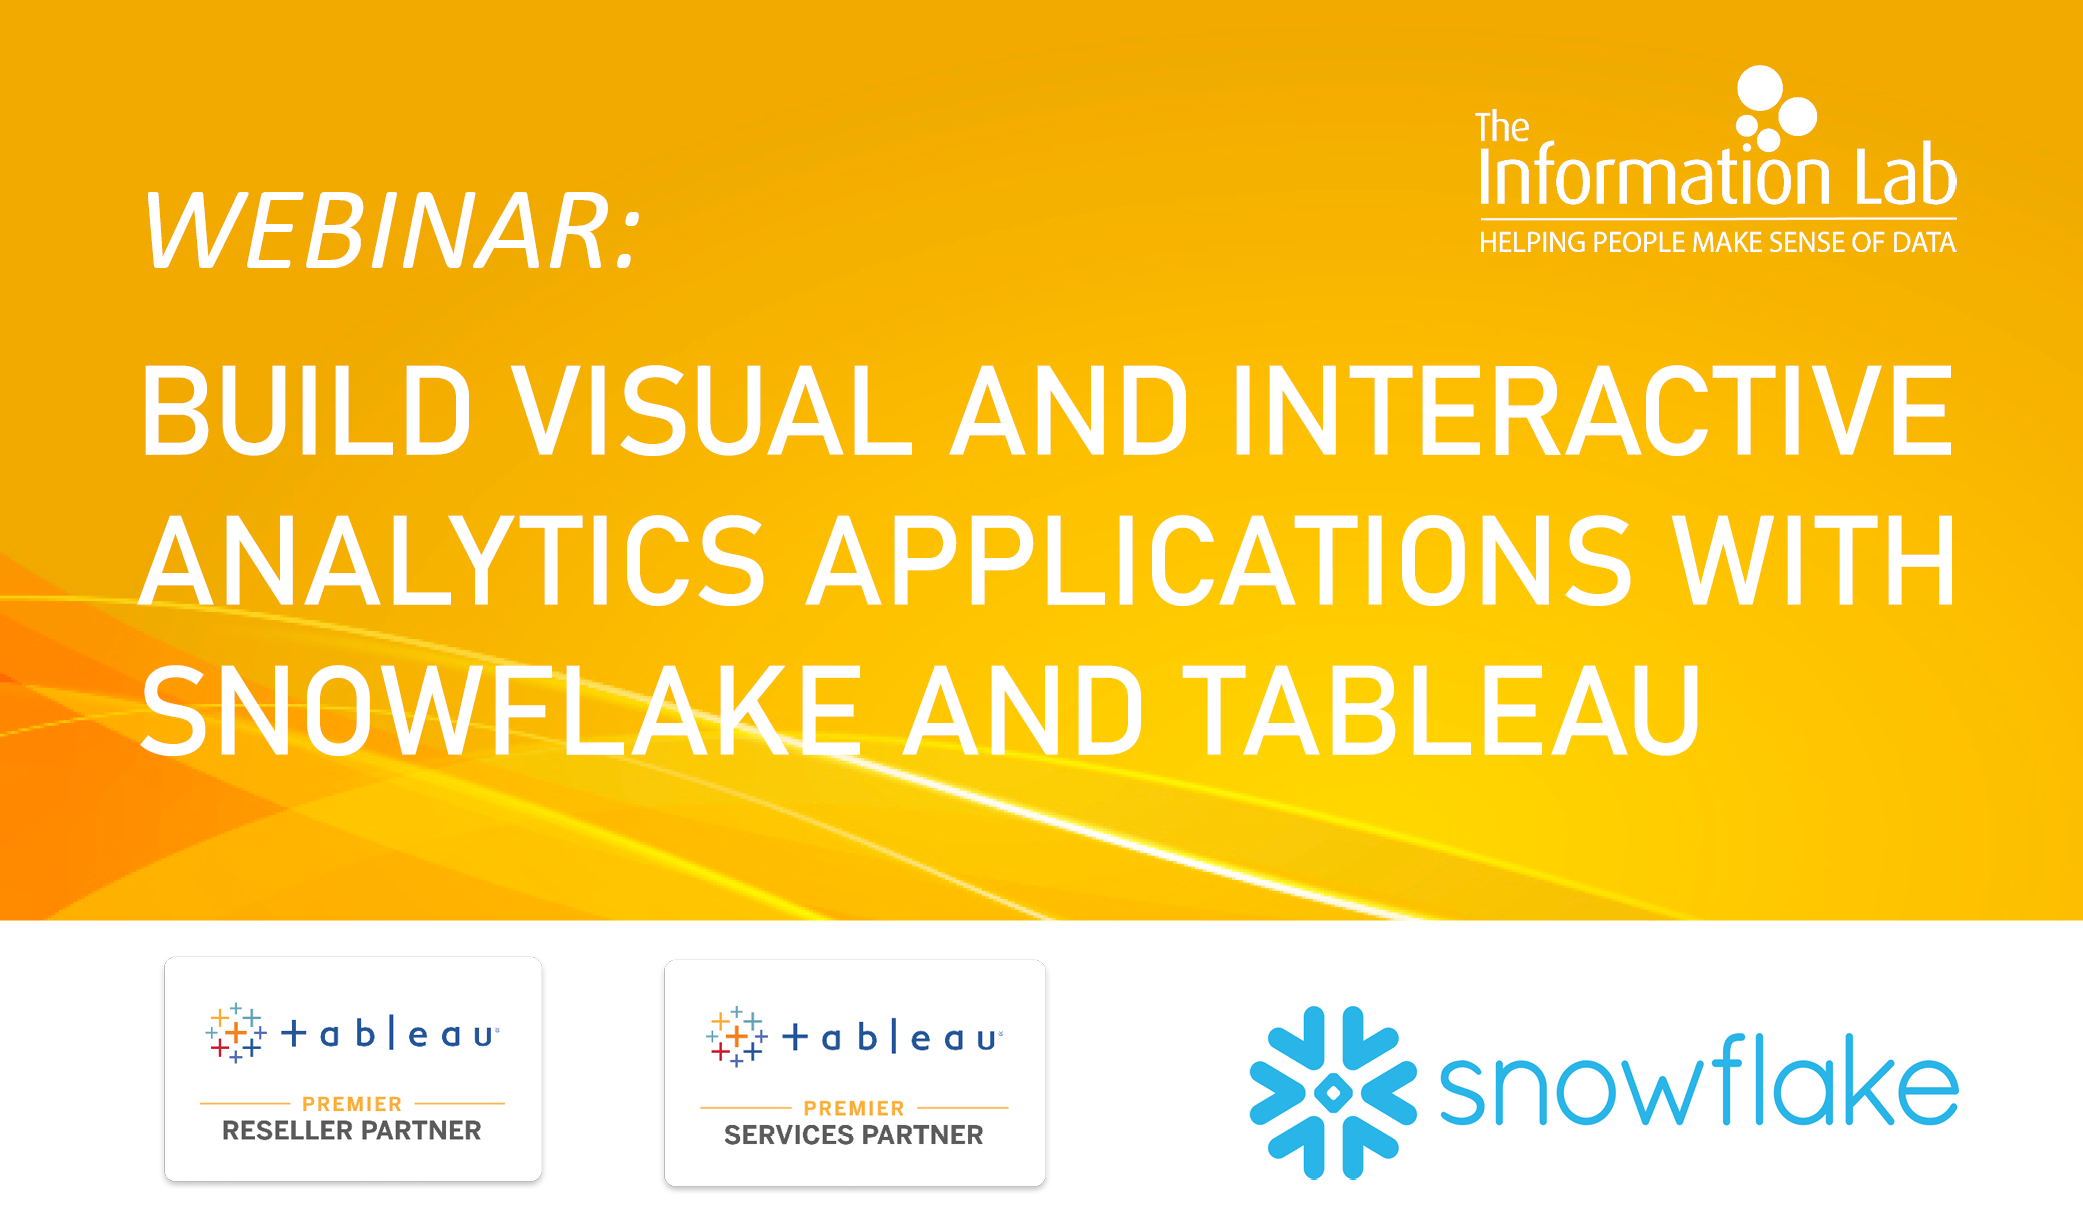 VISUAL & INTERACTIVE ANALYTICS APPLICATIONS WITH SNOWFLAKE & TABLEAU